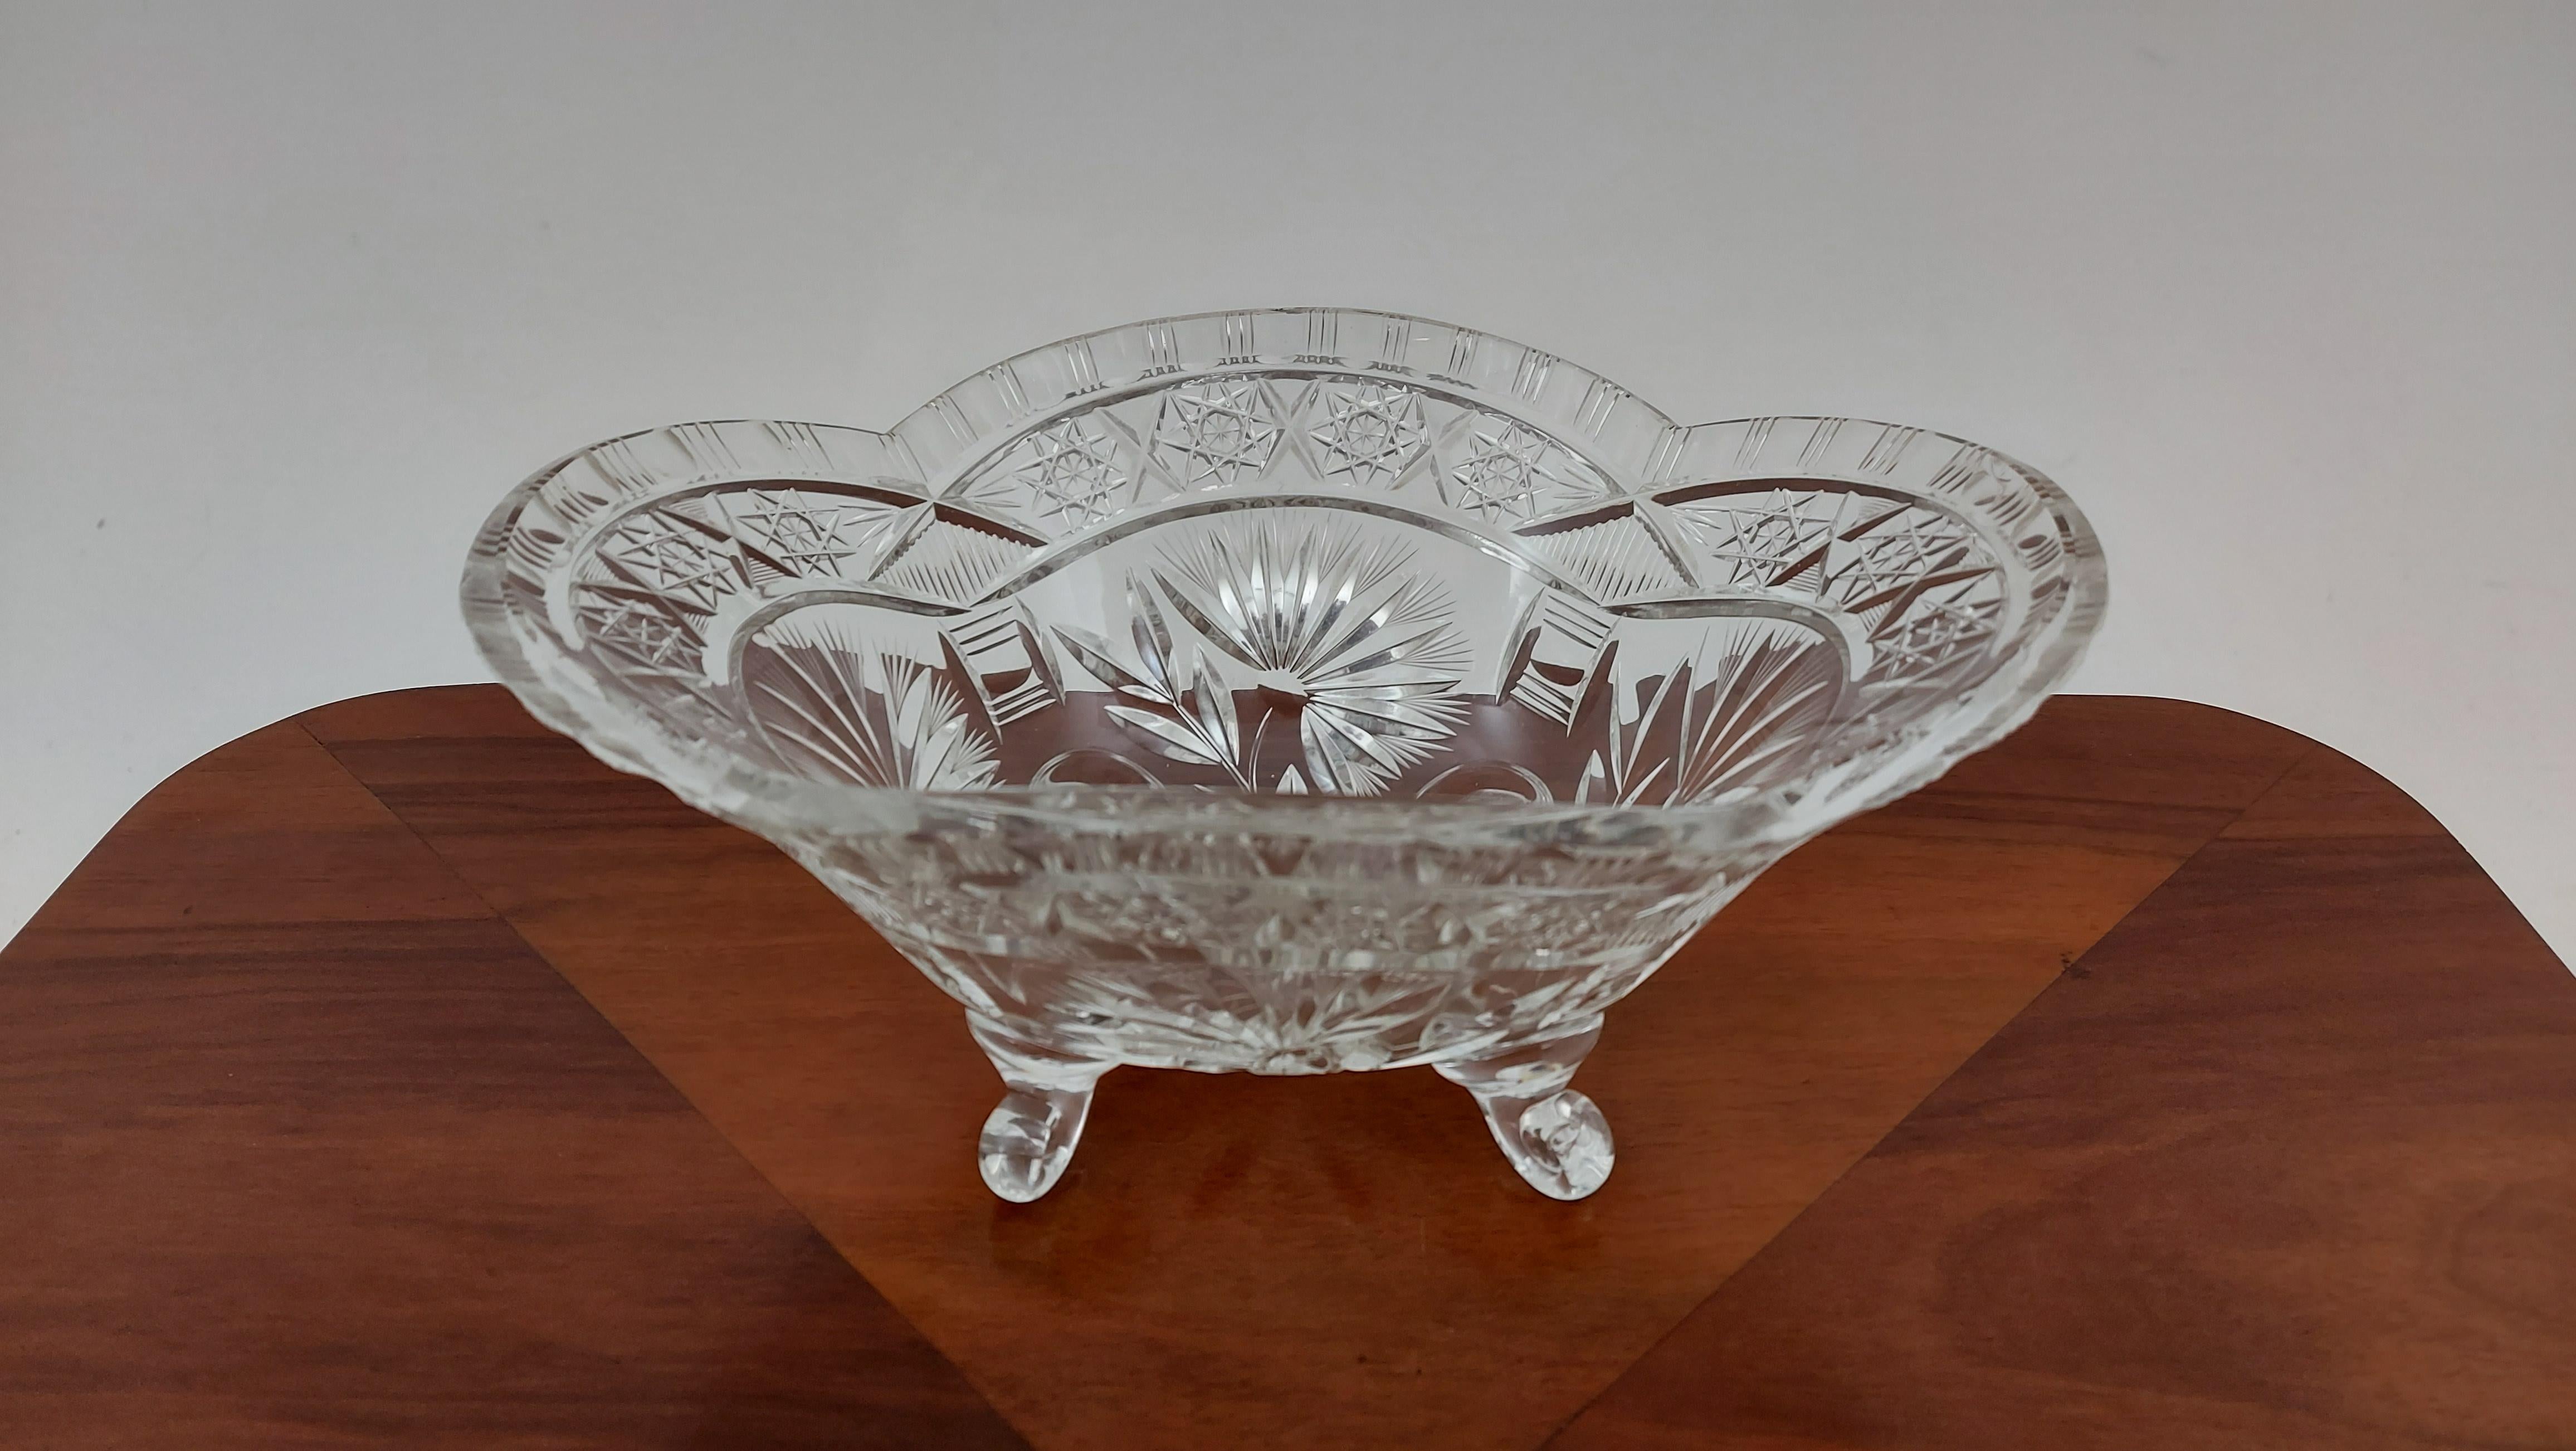 Crystal bowl / platter for fruit or sweets.

Made in Poland in the 1950s / 1960s.

Good condition - slight damage visible in the photos

Dimensions: height 12.5 cm / width 27 cm / depth 18.5 cm.